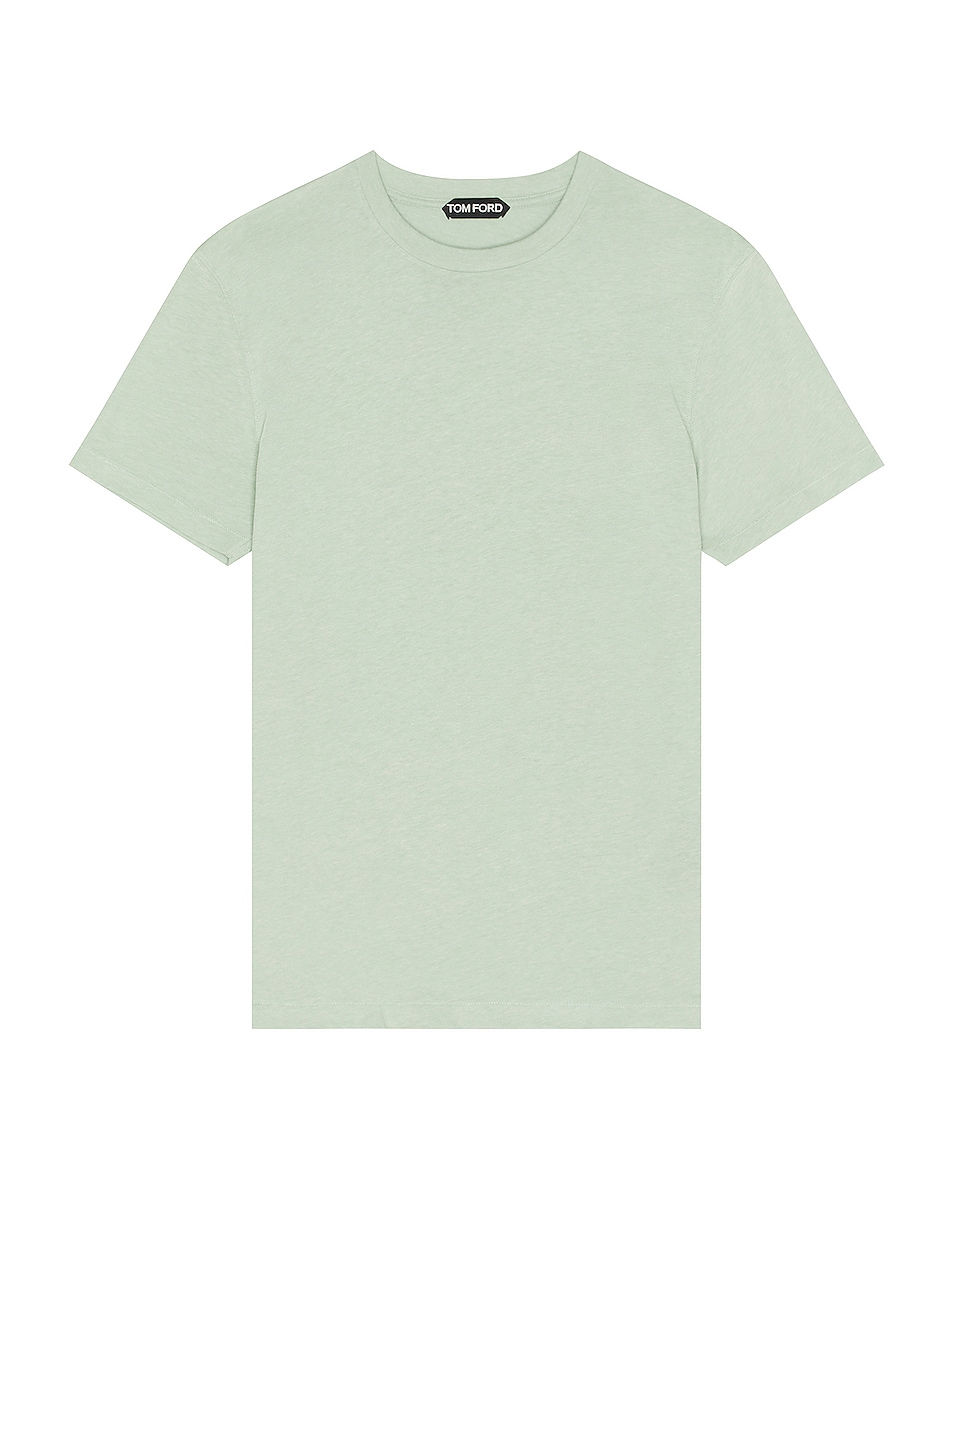 Image 1 of TOM FORD Tee in Mint